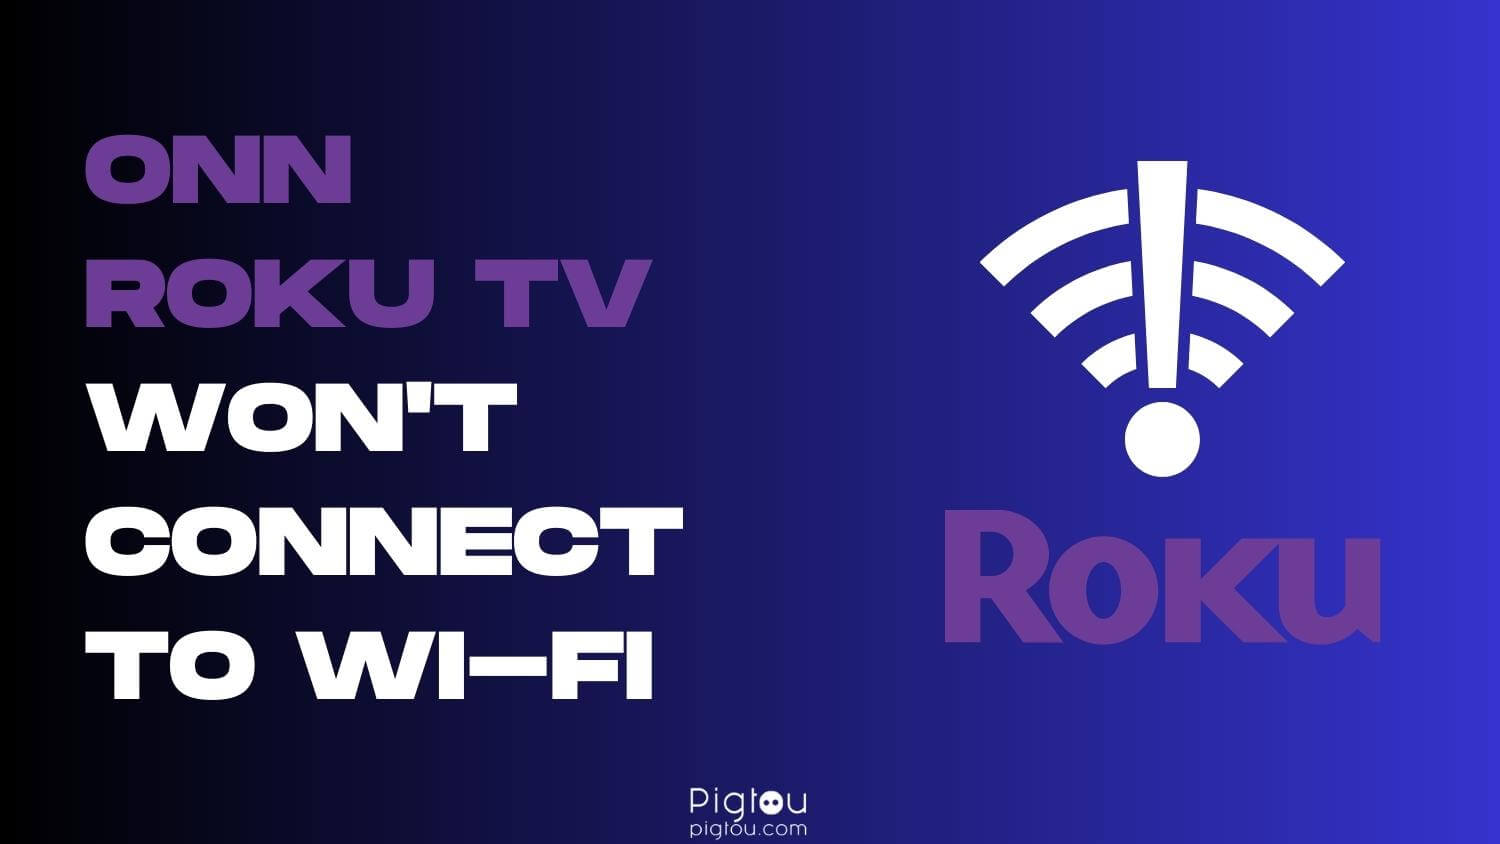 Onn Roku TV Won't Connect to Wi-Fi [SOLVED!]